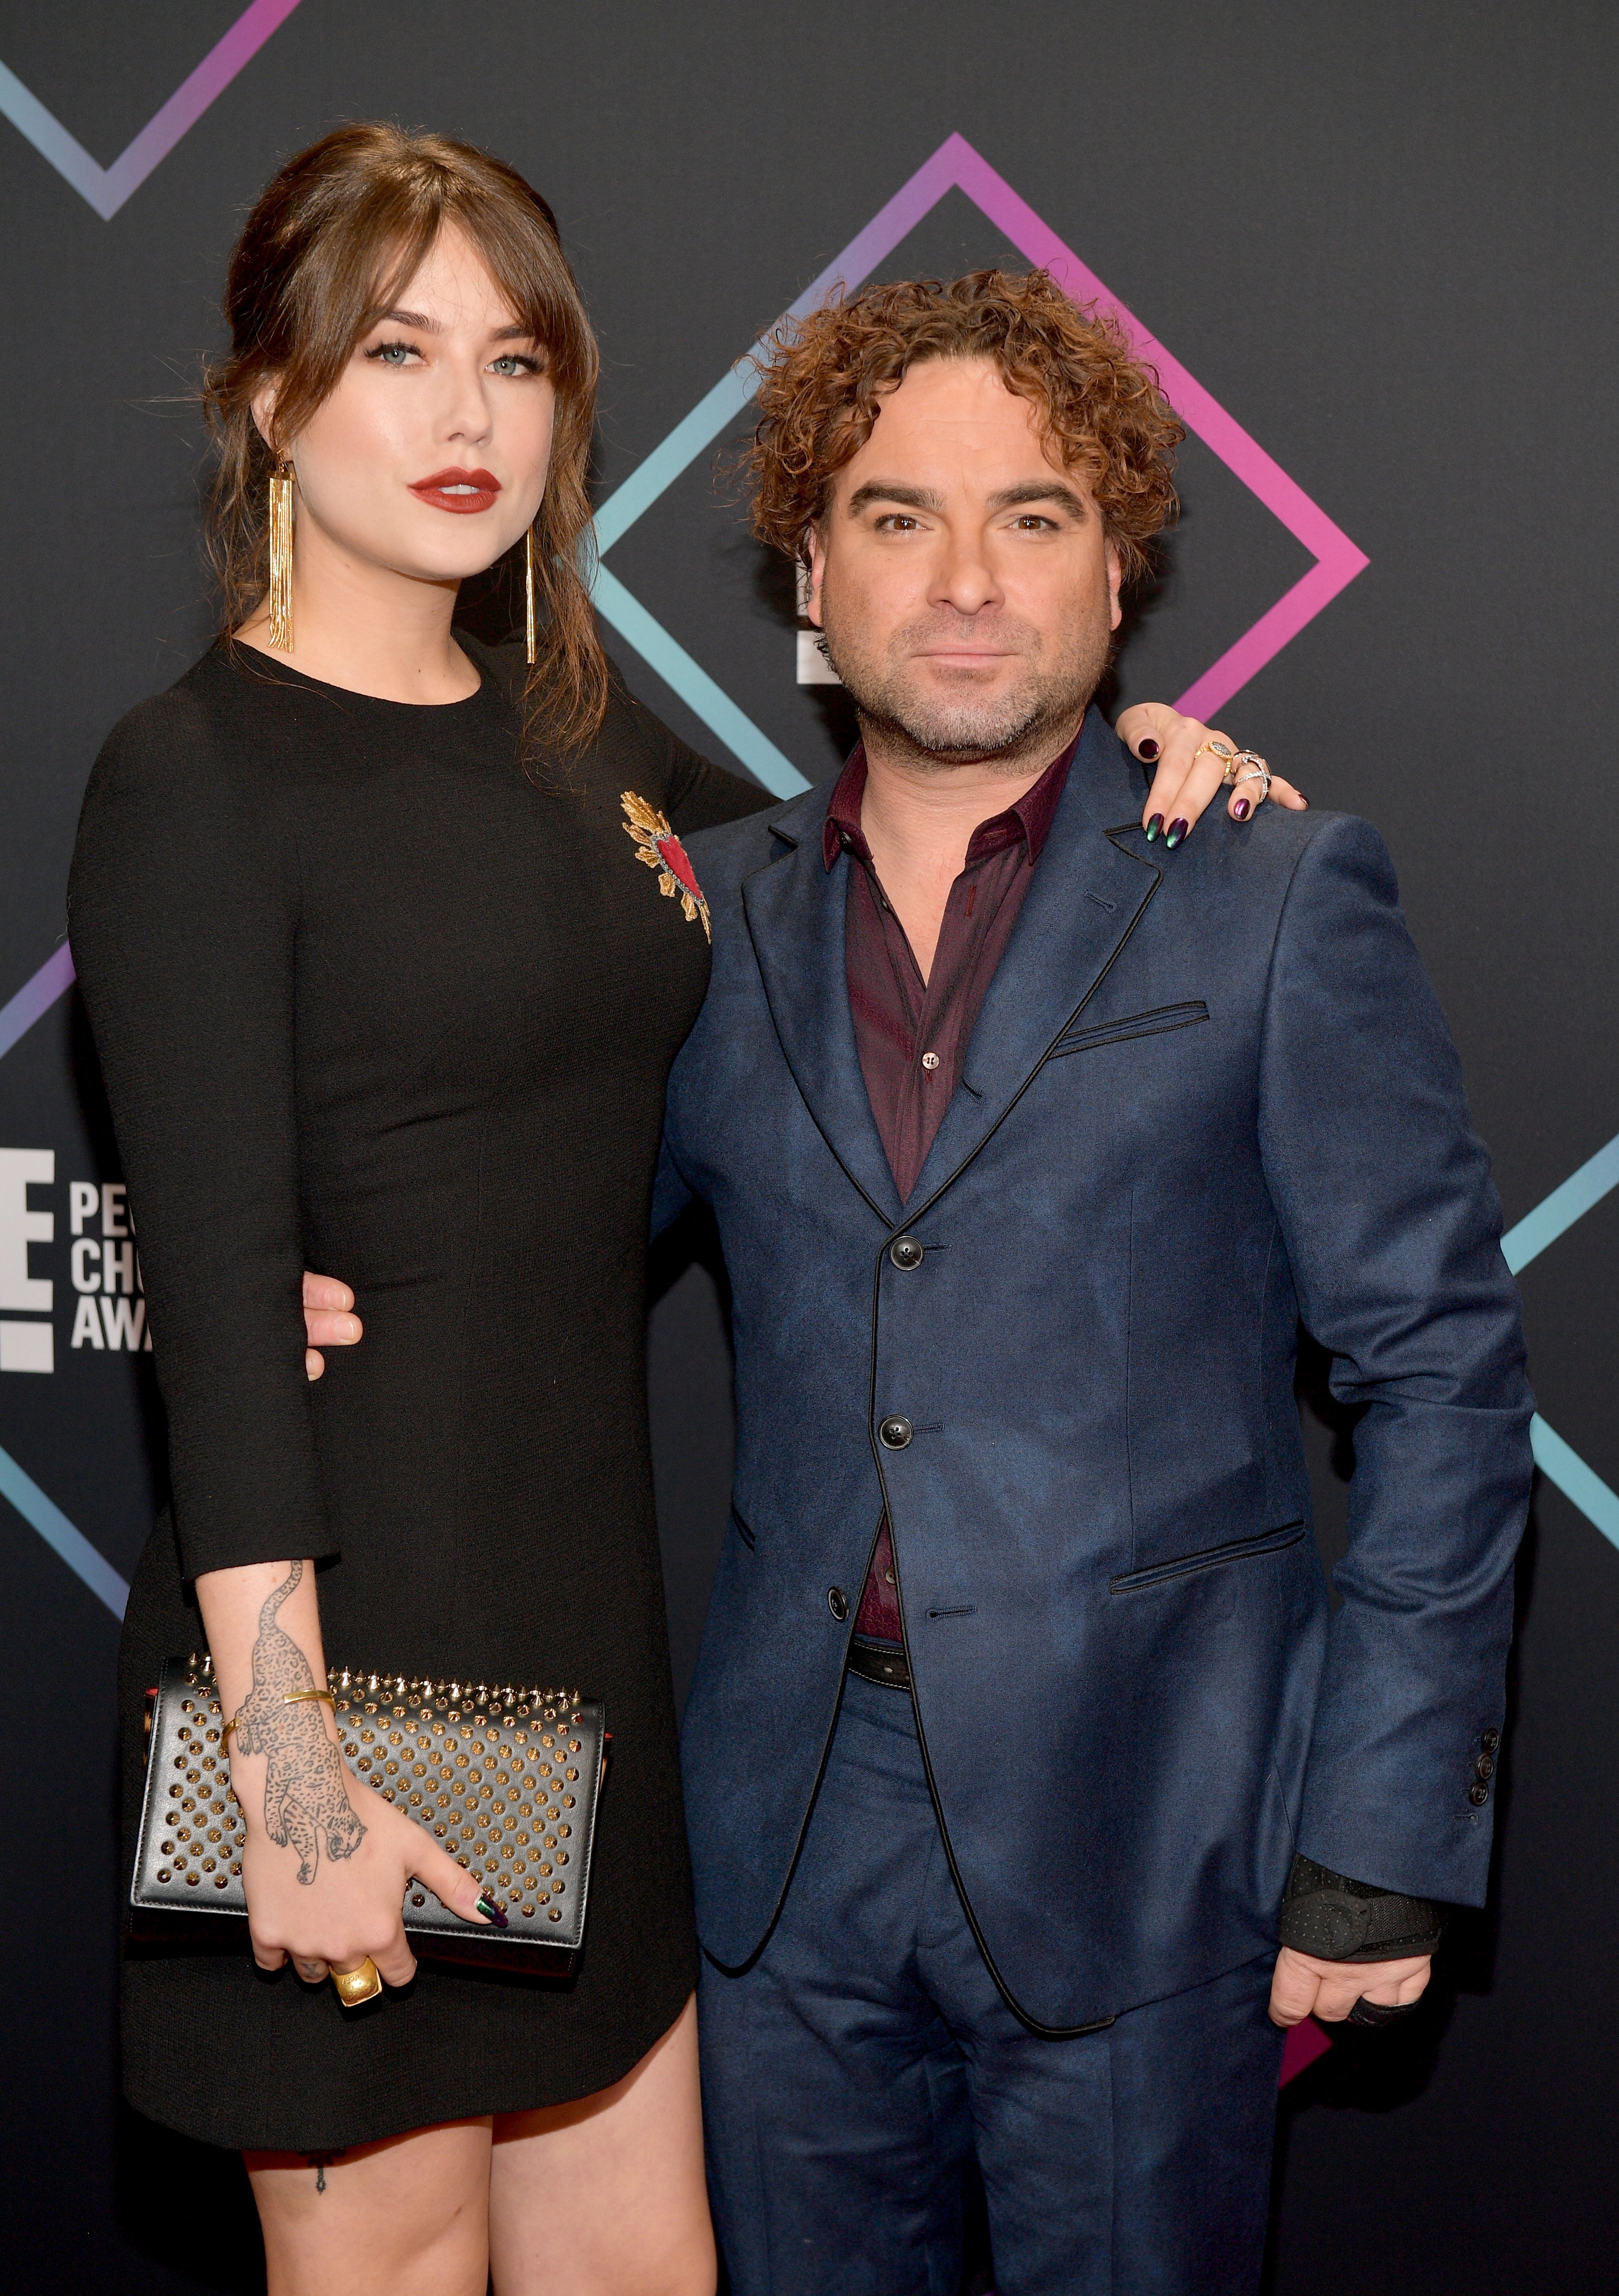 Johnny Galecki  and Alaina Meyer attend the People's Choice Awards 2018 on November 11, 2018, in Santa Monica, California. | Source: Getty Images.